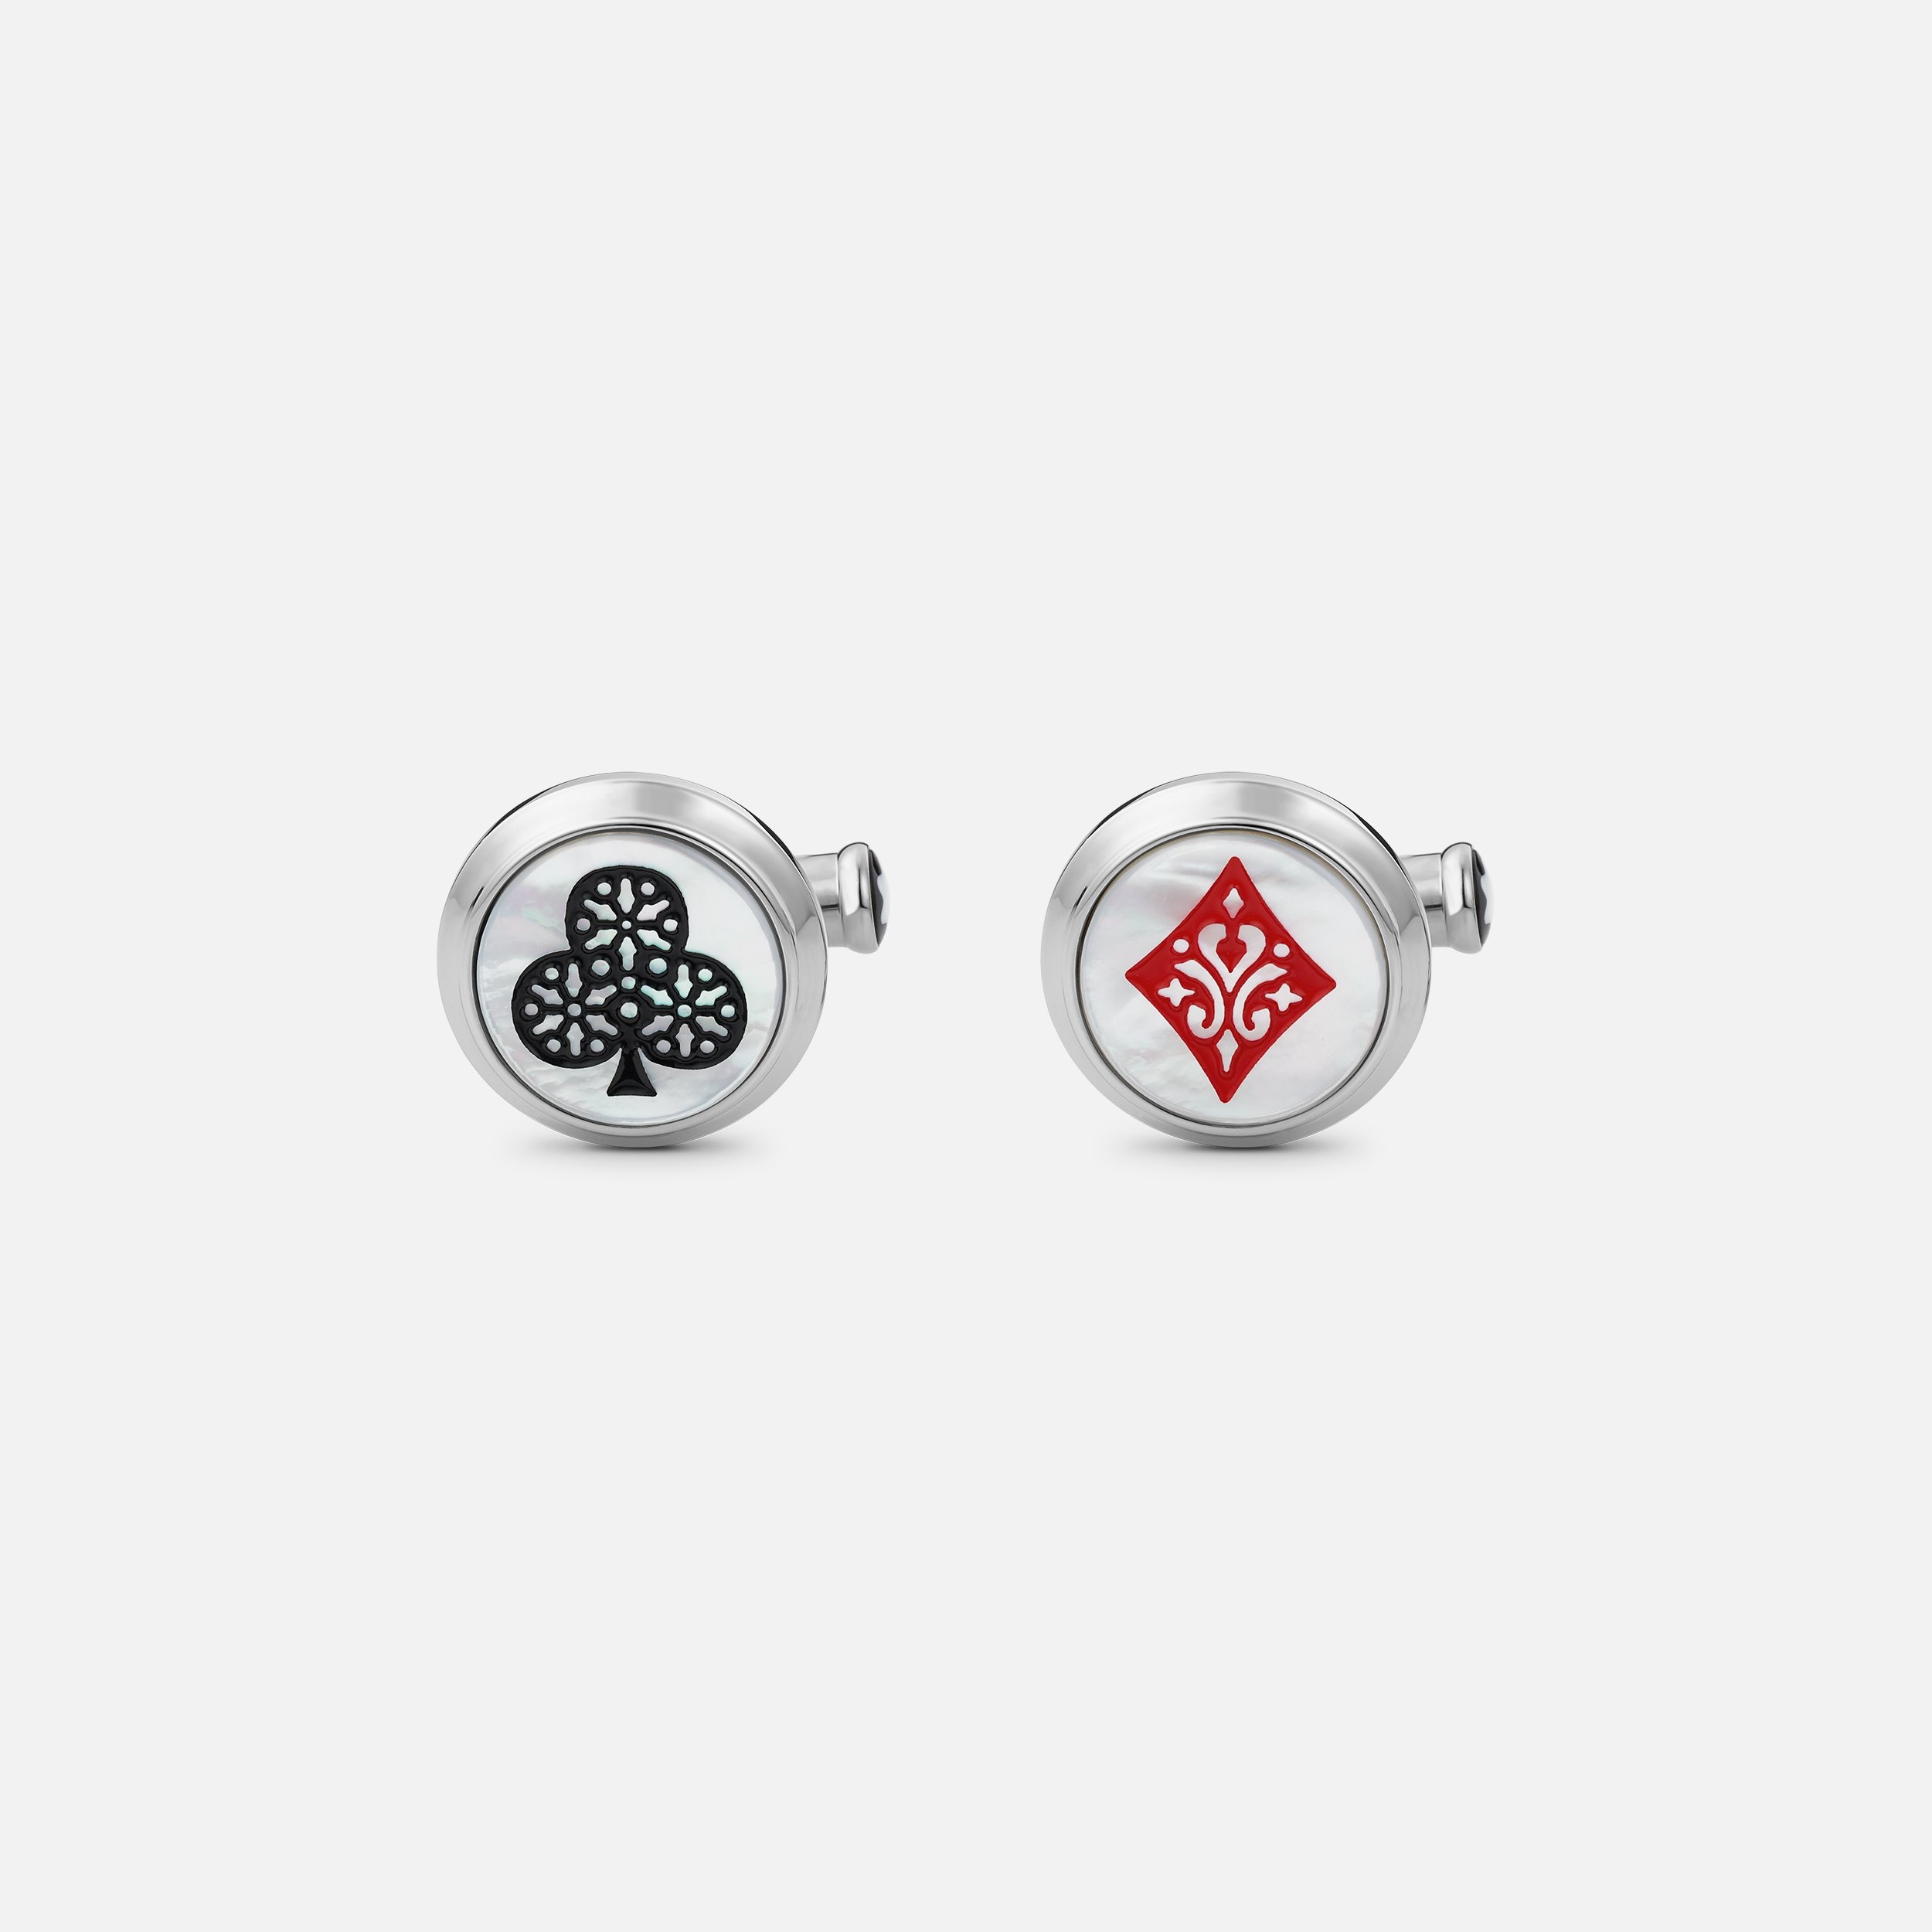 Meisterstück Tribute to the Book Around the World in 80 Days Ace of Club & Ace of Diamond Cufflinks - 1